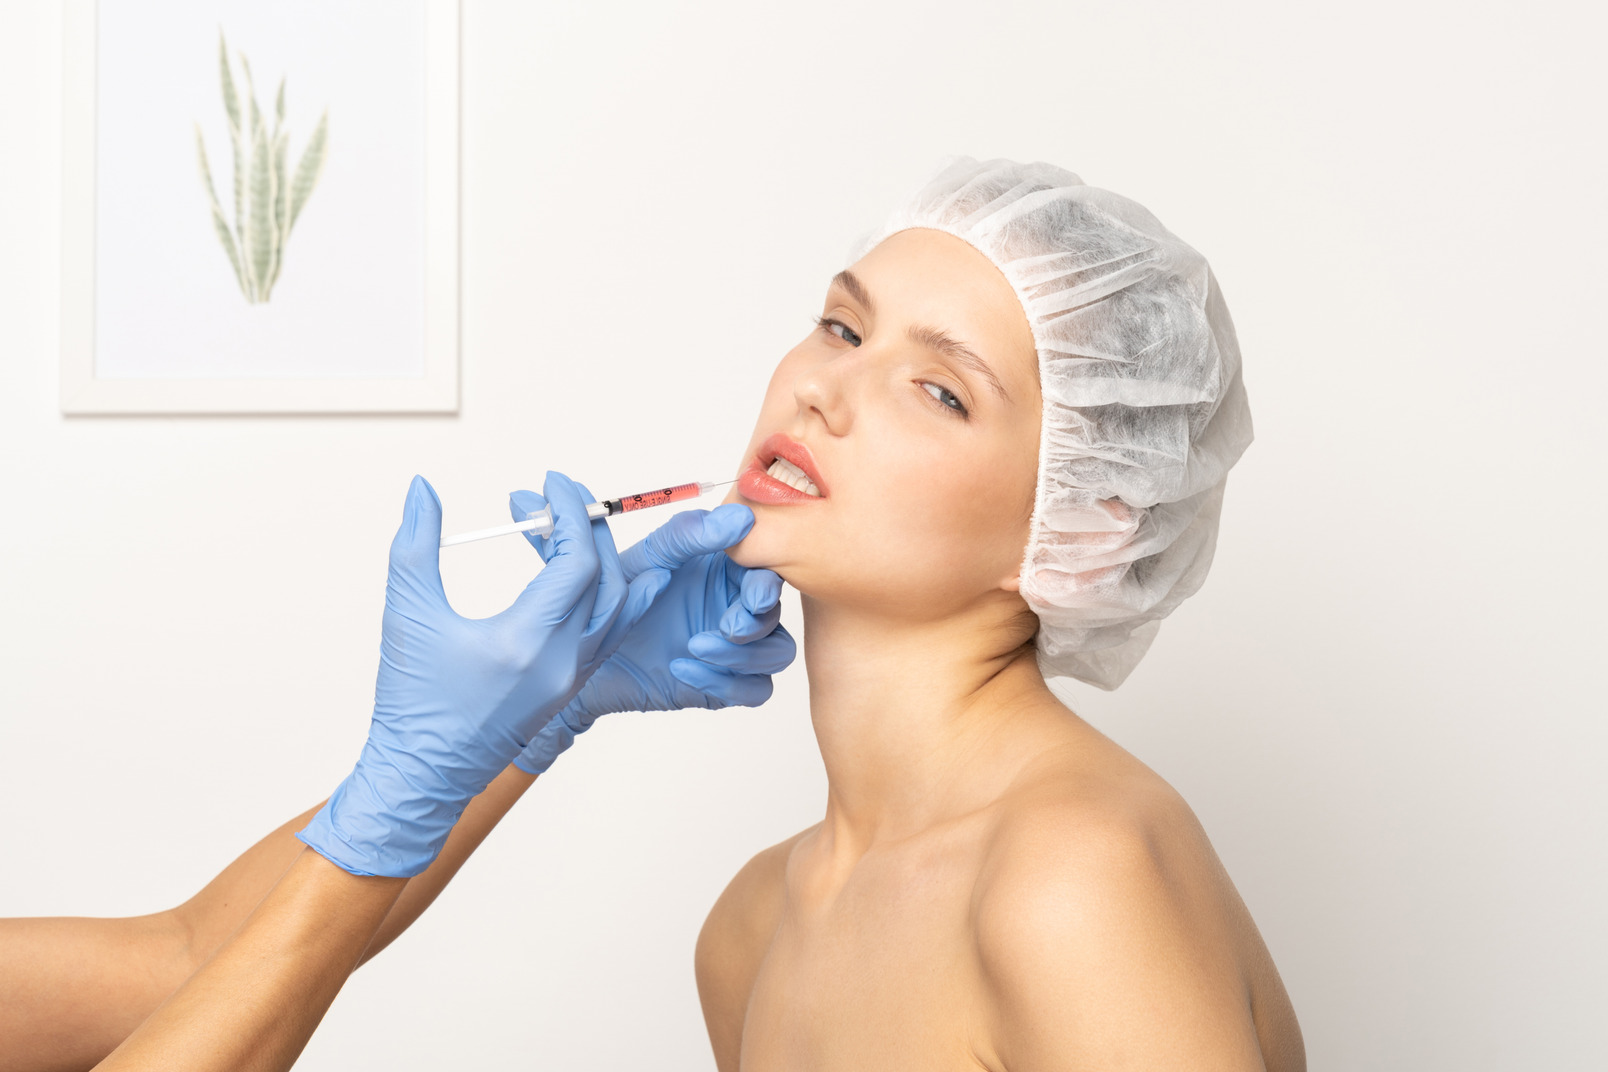 Woman looking tense during lip injection